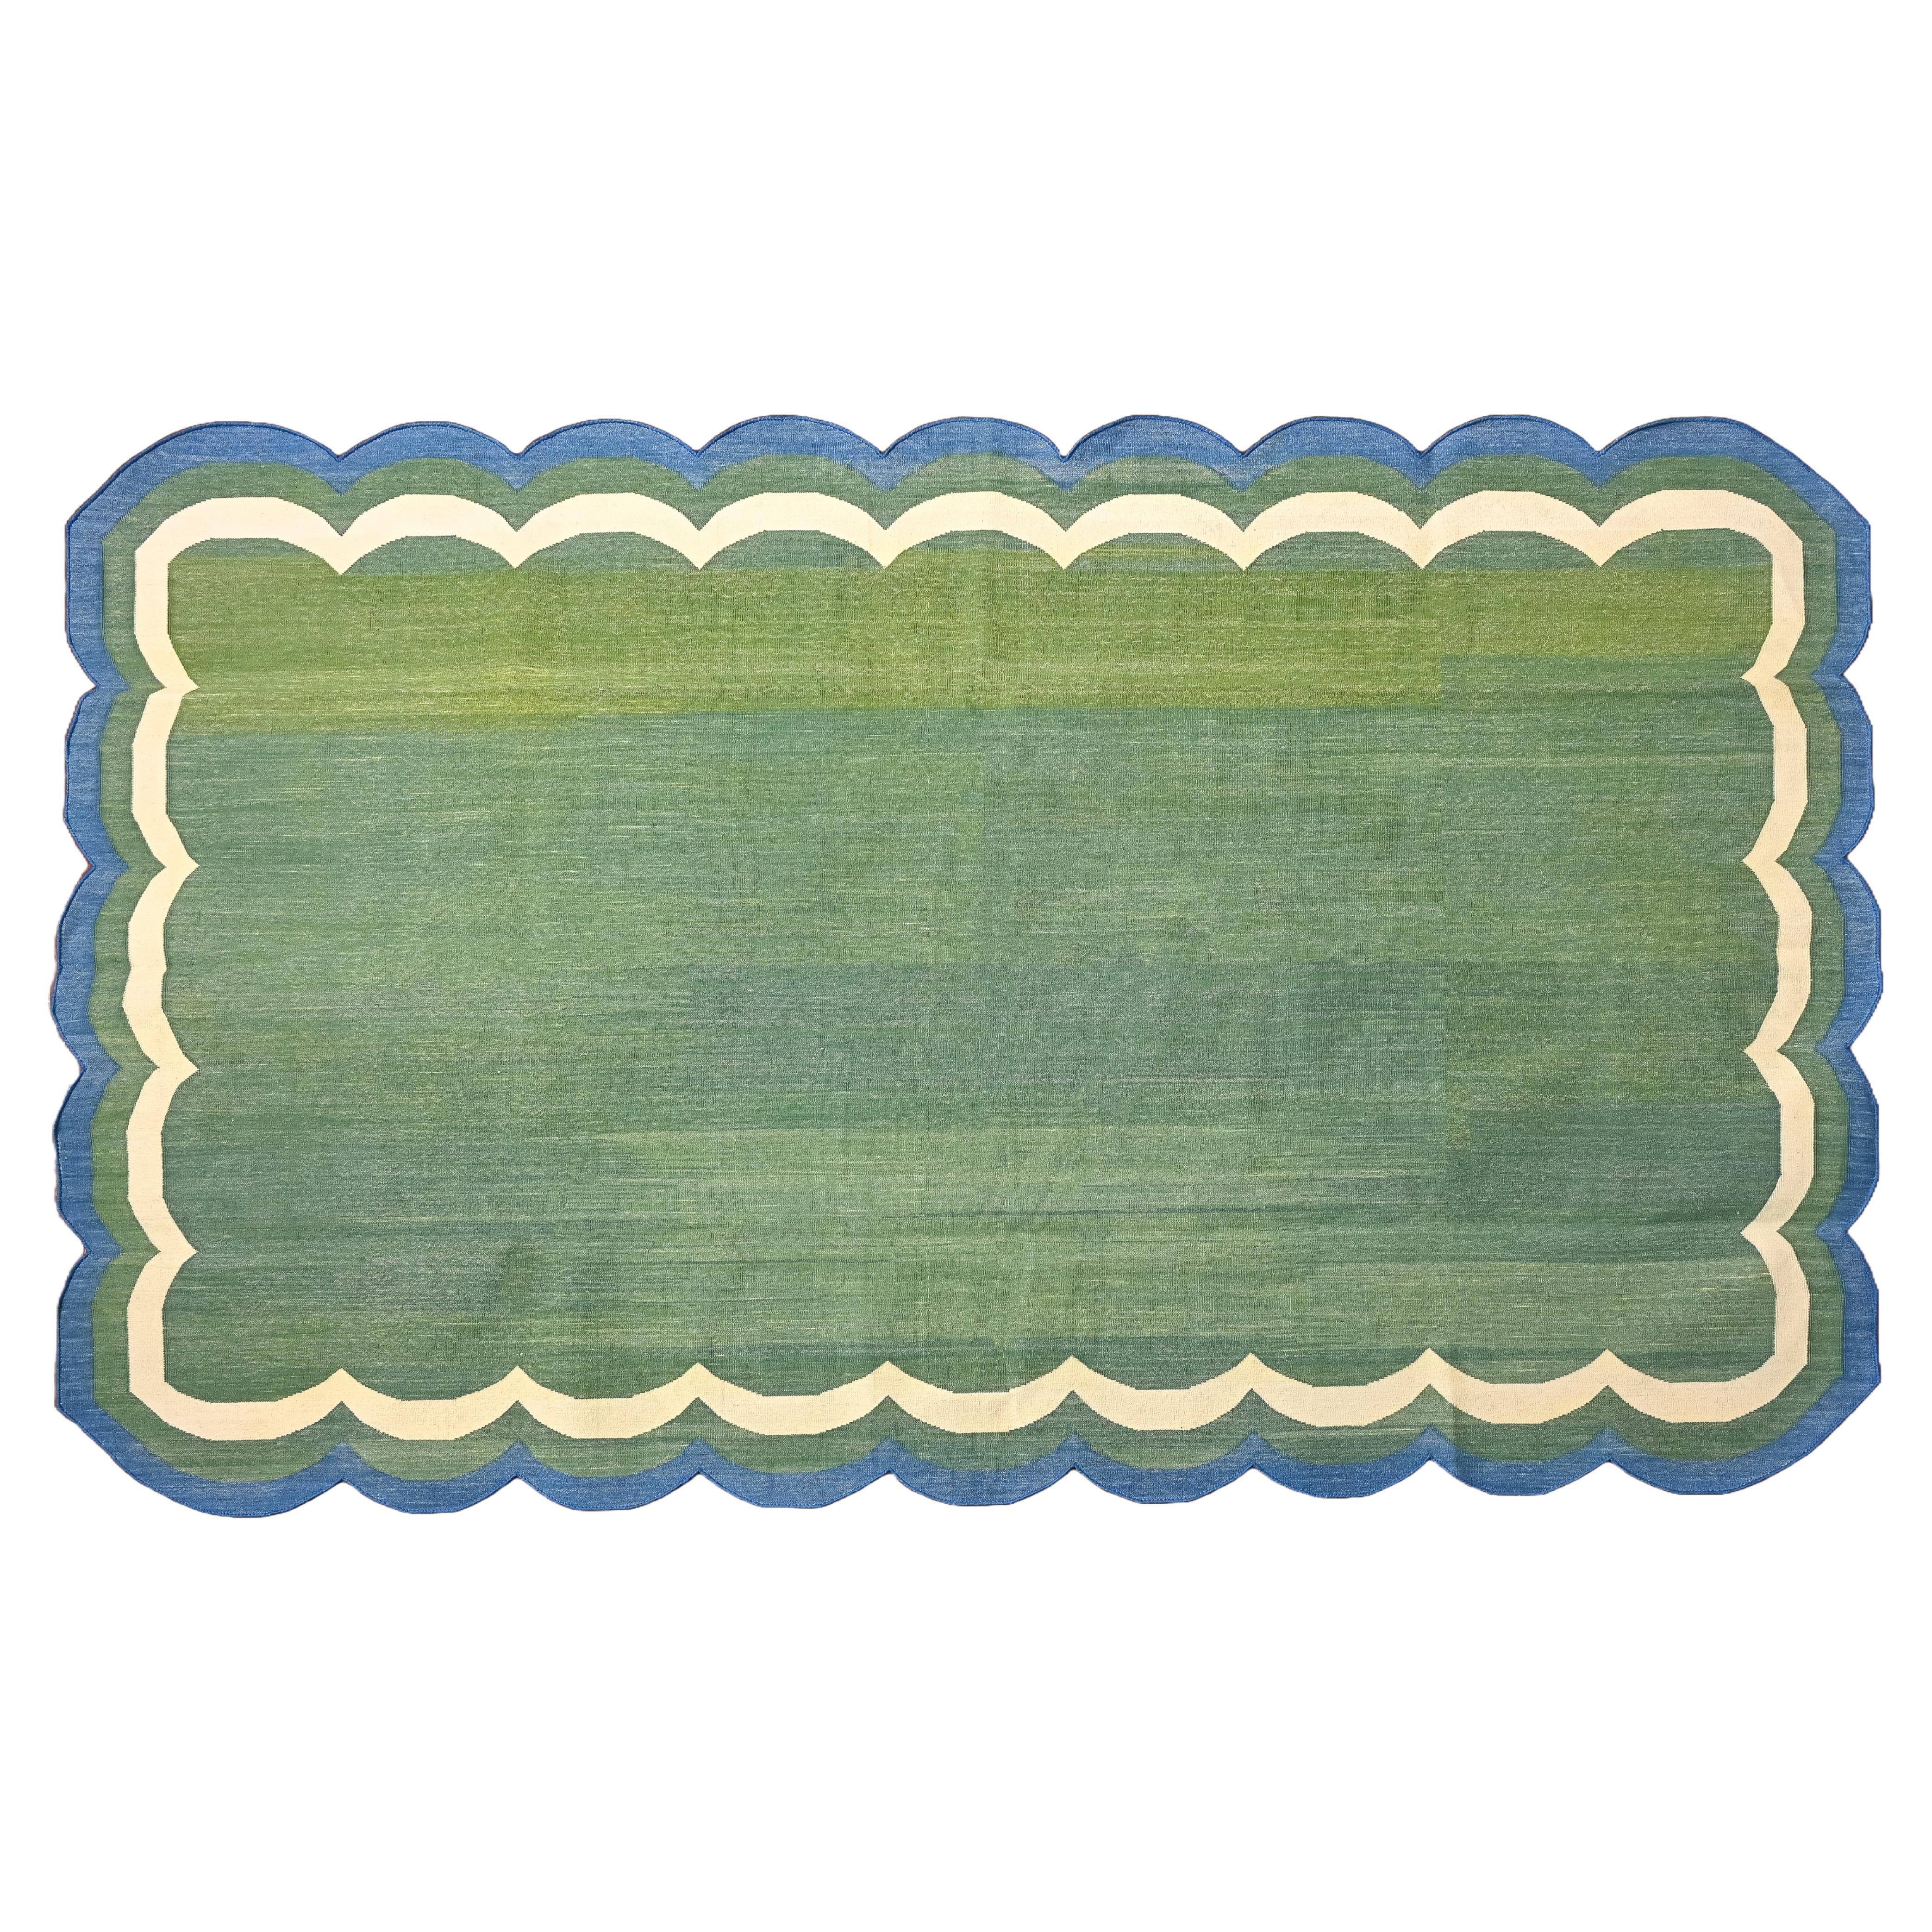 Handmade Cotton Area Flat Weave Rug, Green And Teal Blue Scallop Indian Dhurrie For Sale